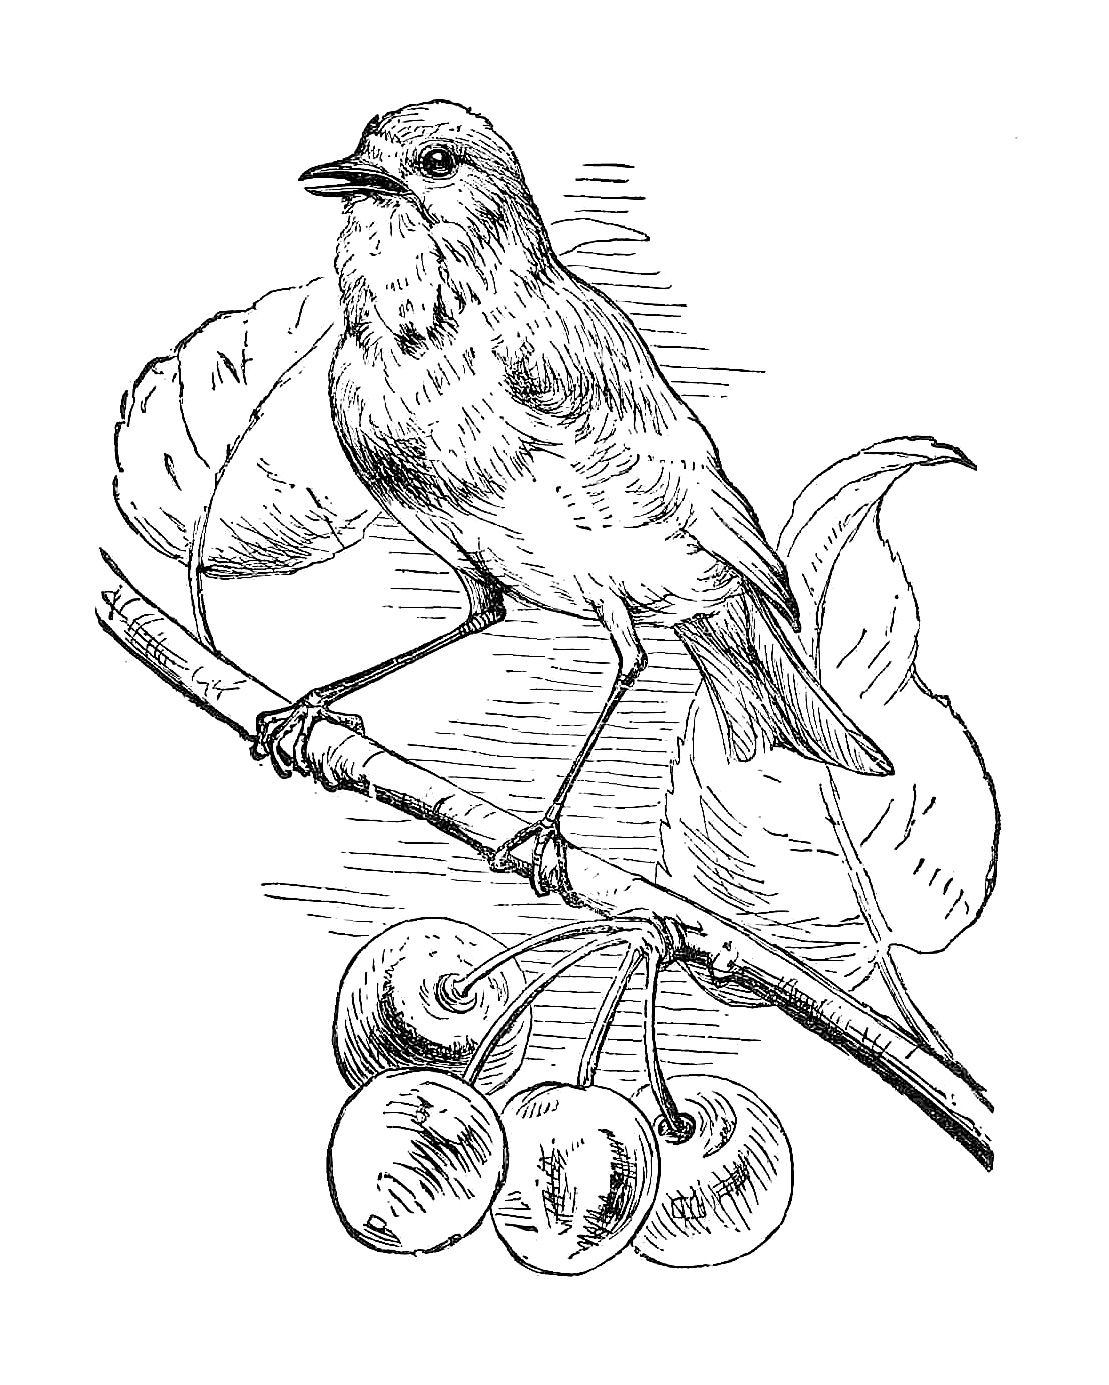 Free Black And White Illustration  Bird Clip Art From Victorian